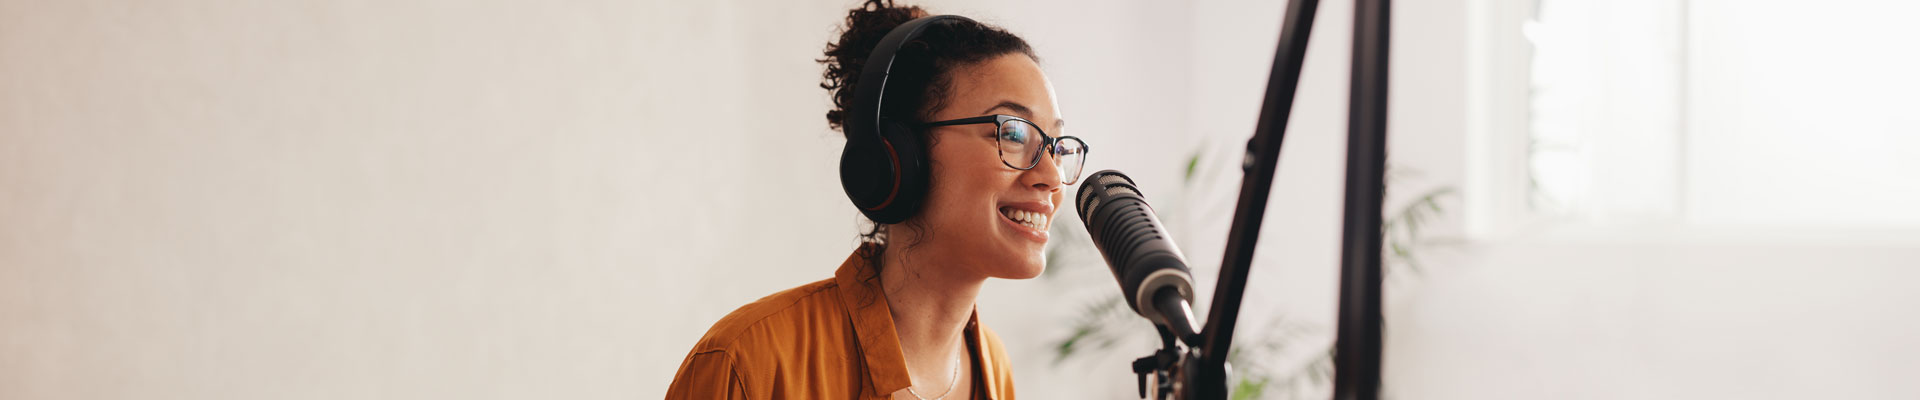 A woman wearing headphone speaking into a microphone.